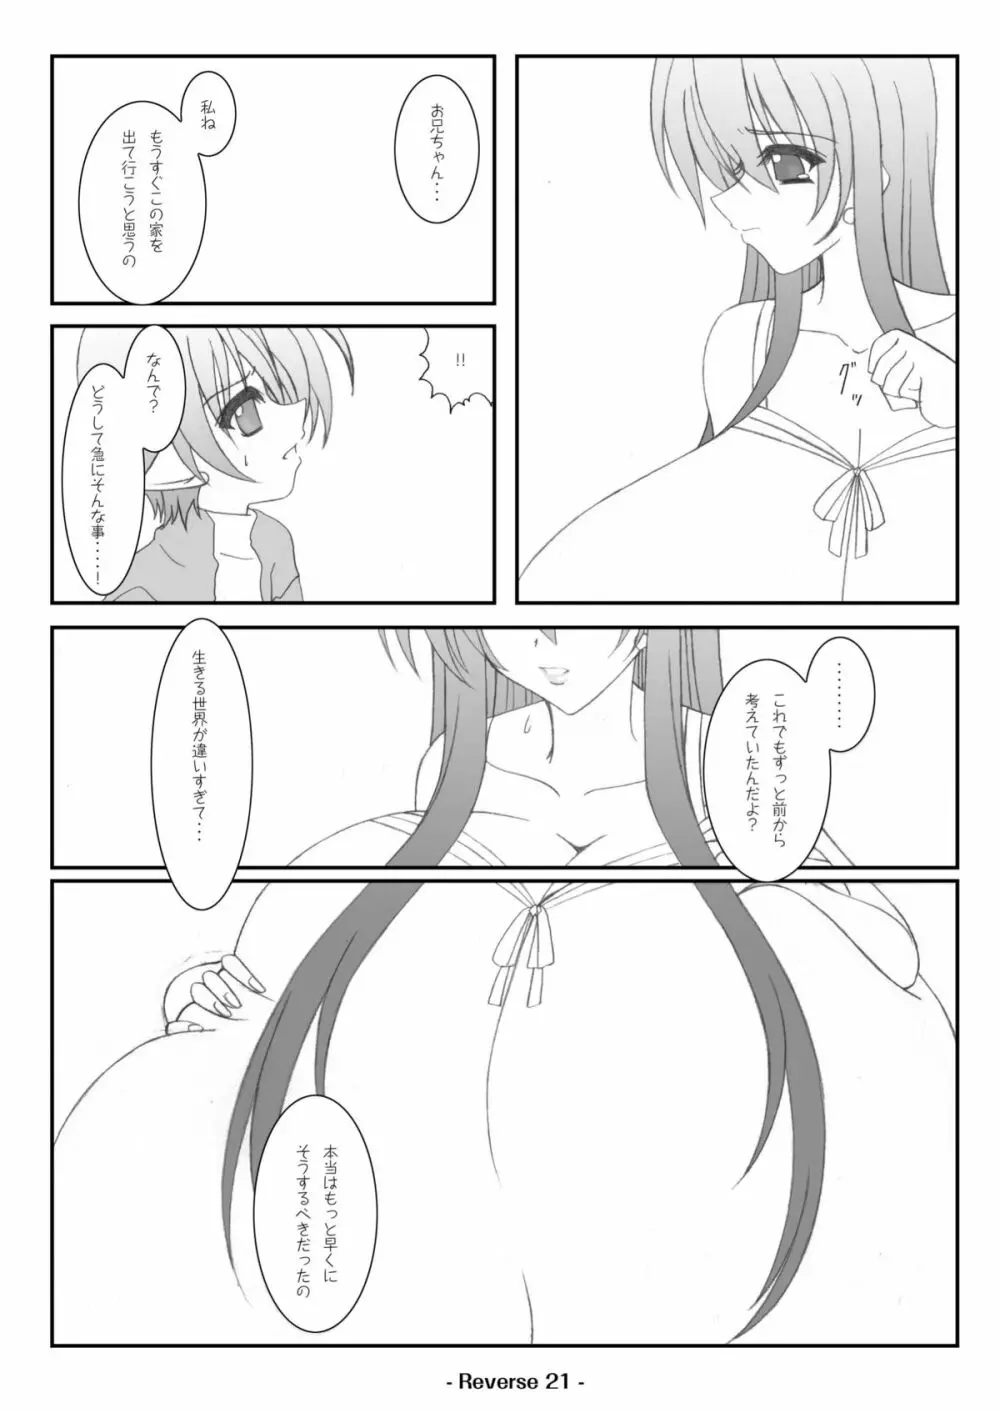 Reverse Page.23